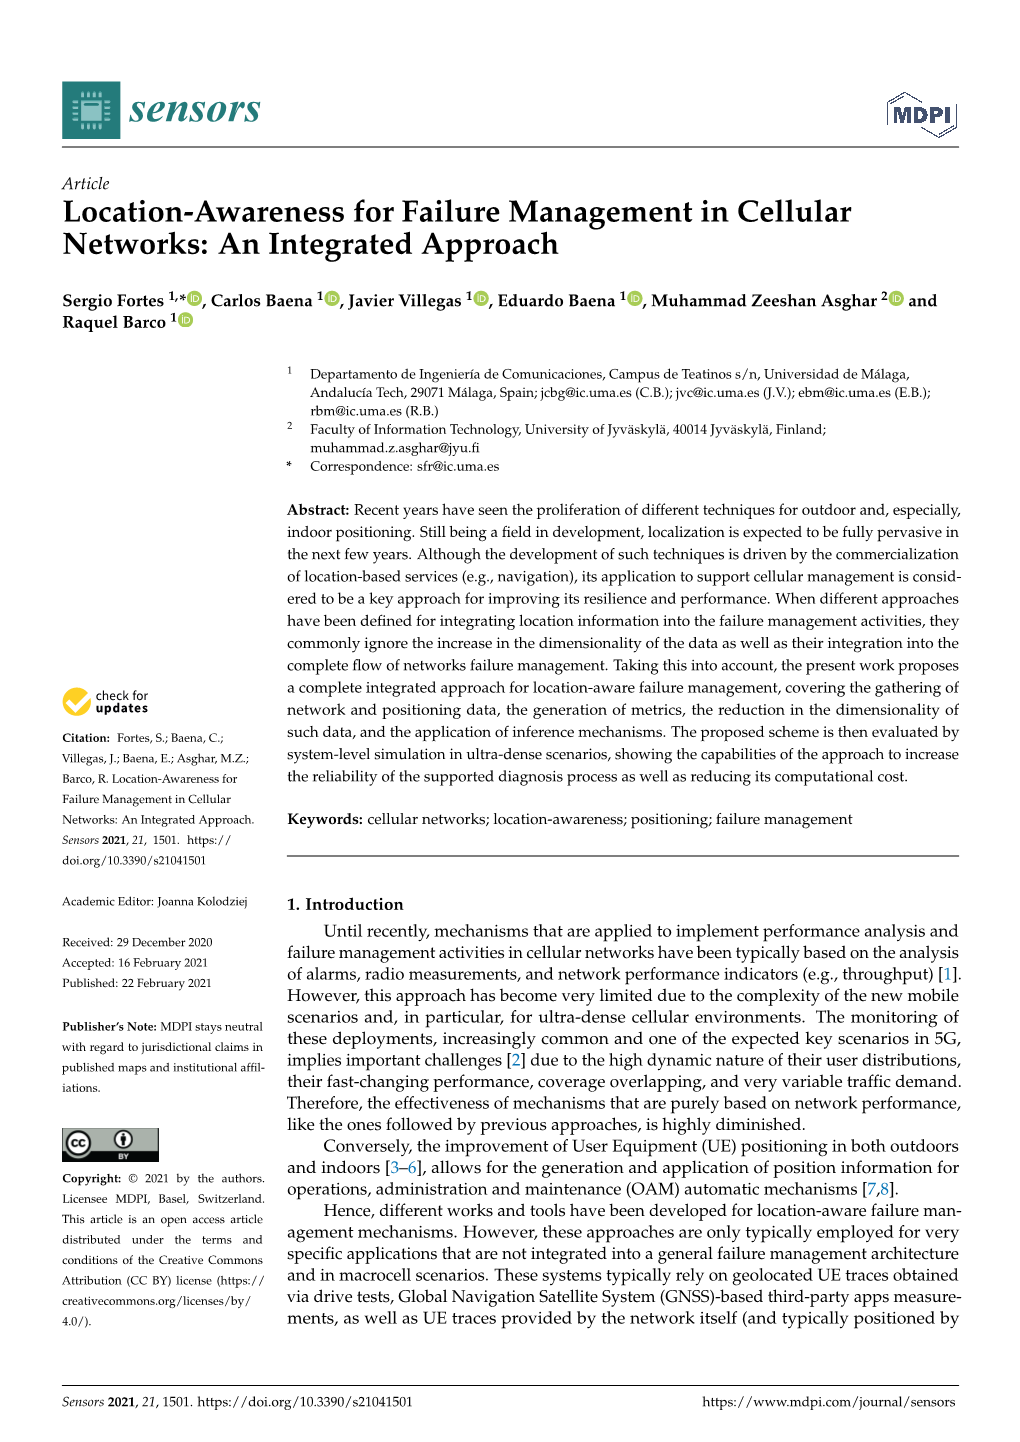 Location-Awareness for Failure Management in Cellular Networks: an Integrated Approach